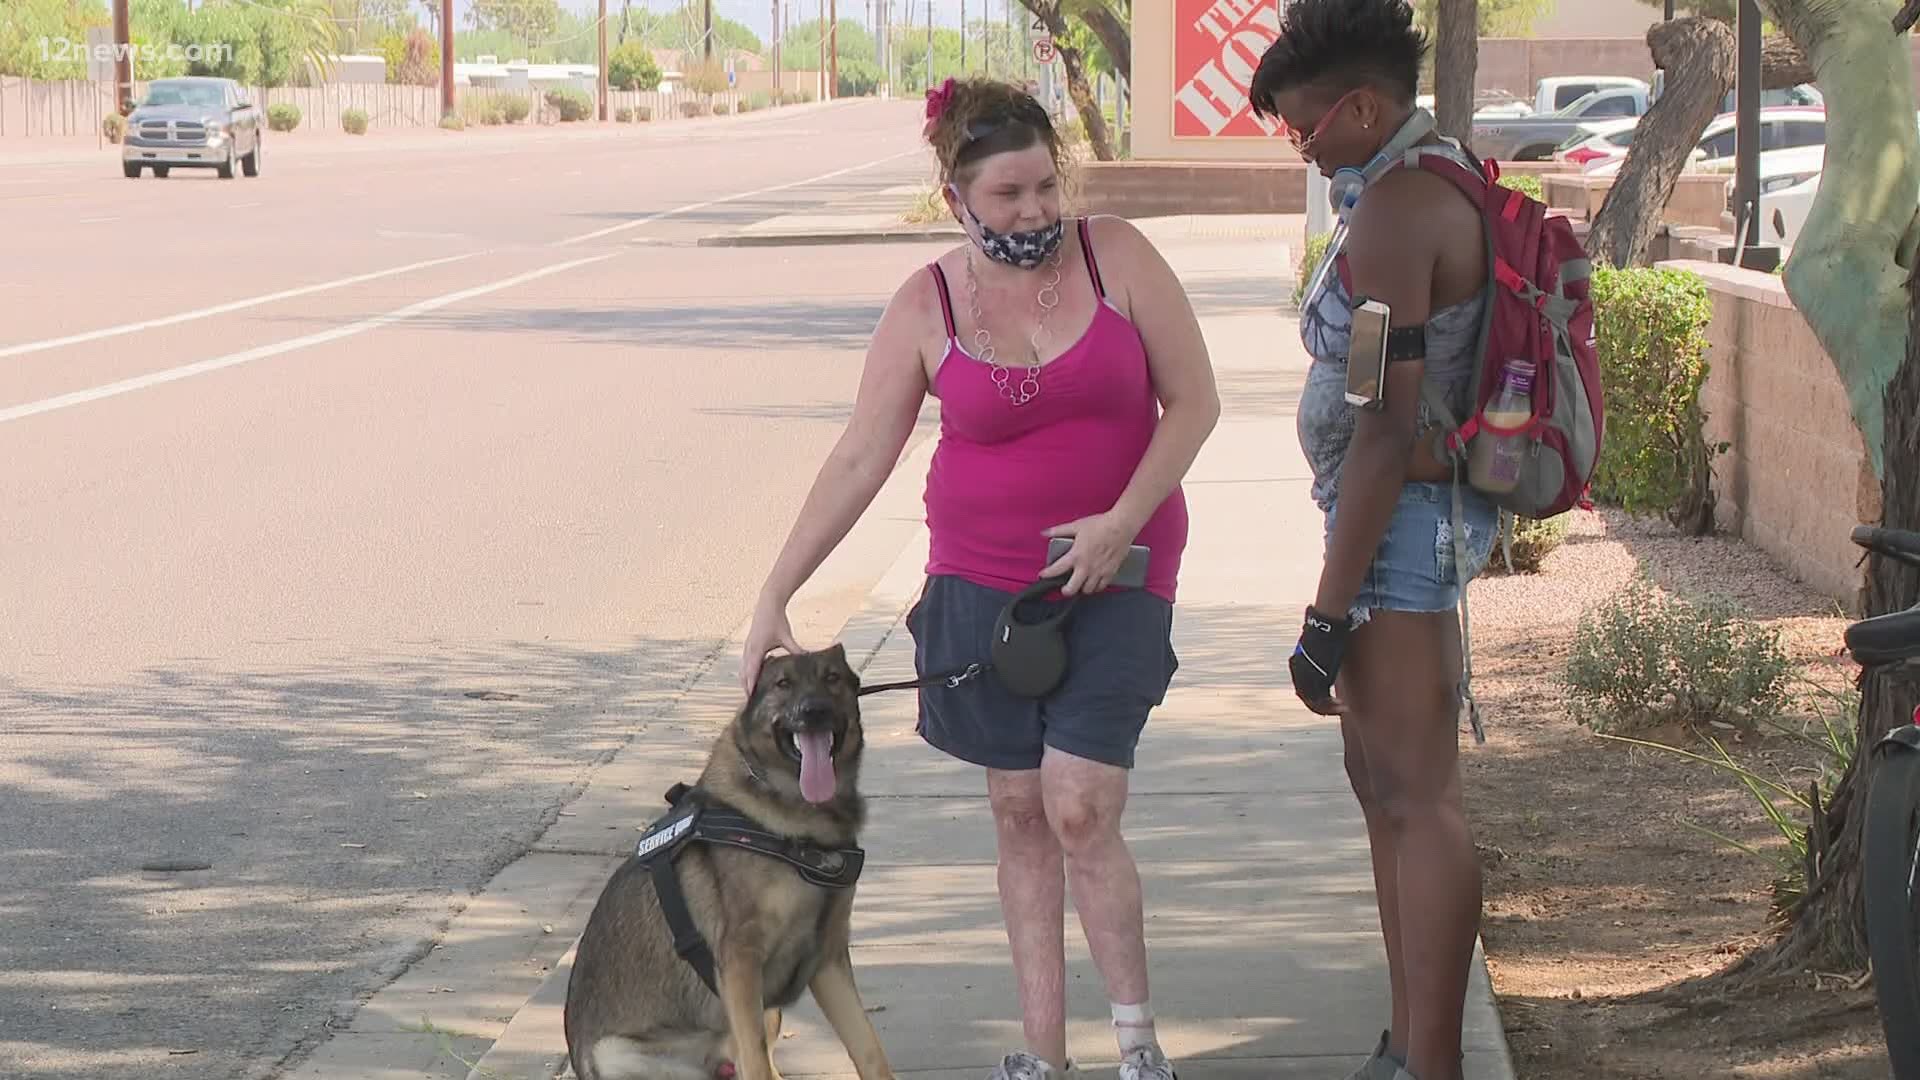 Kelley McHood takes the bus on Val Vista and Broadway every day to get home. She says the driver has gone right by her, refusing service to her and her service dog.